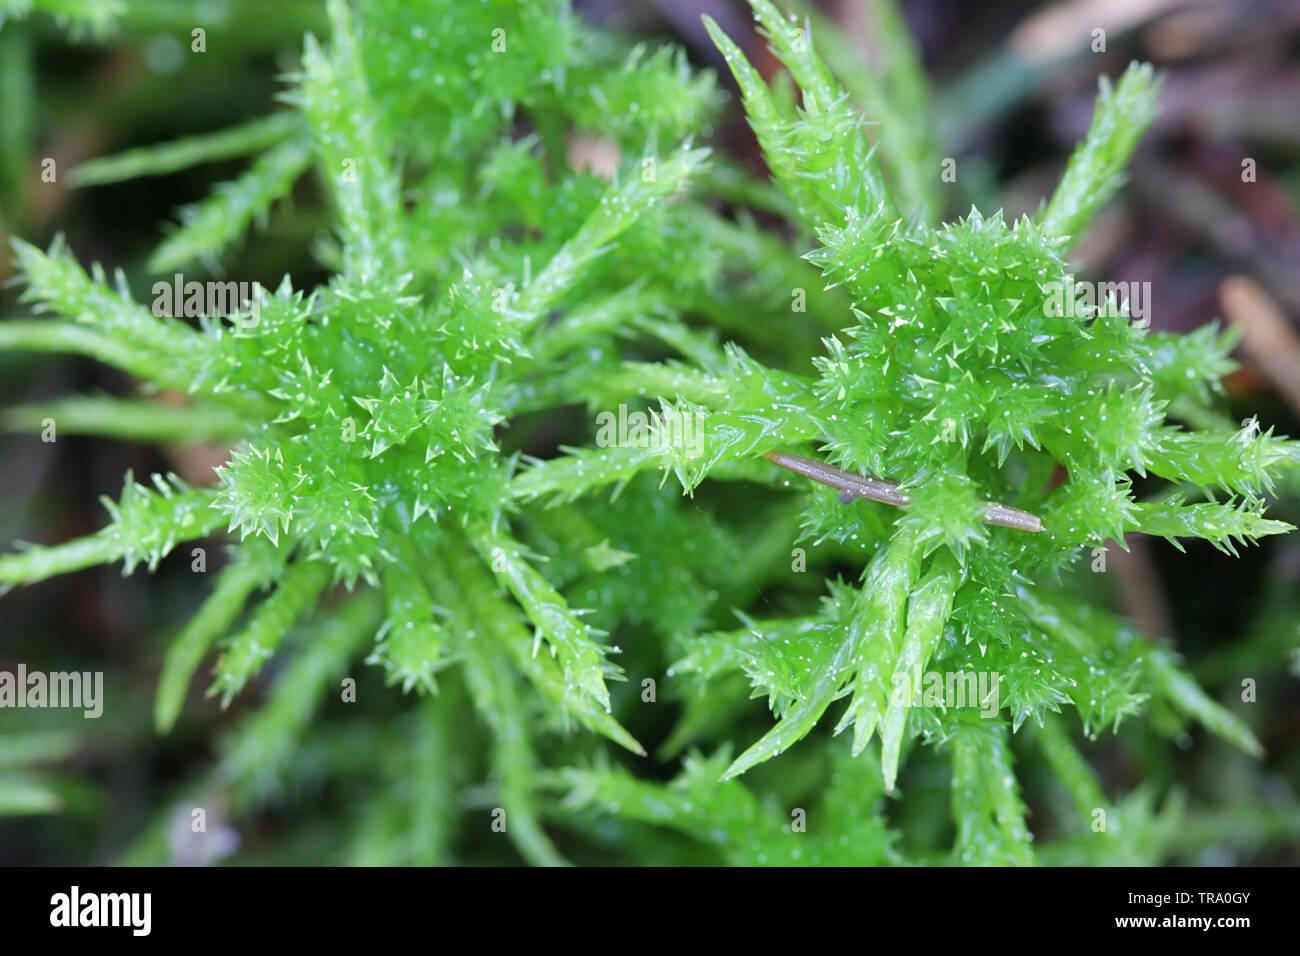 sphagnum-squarrosum-commonly-known-as-the-spiky-bog-moss-or-spreading-leaved-bog-moss-TRA0GY.jpg